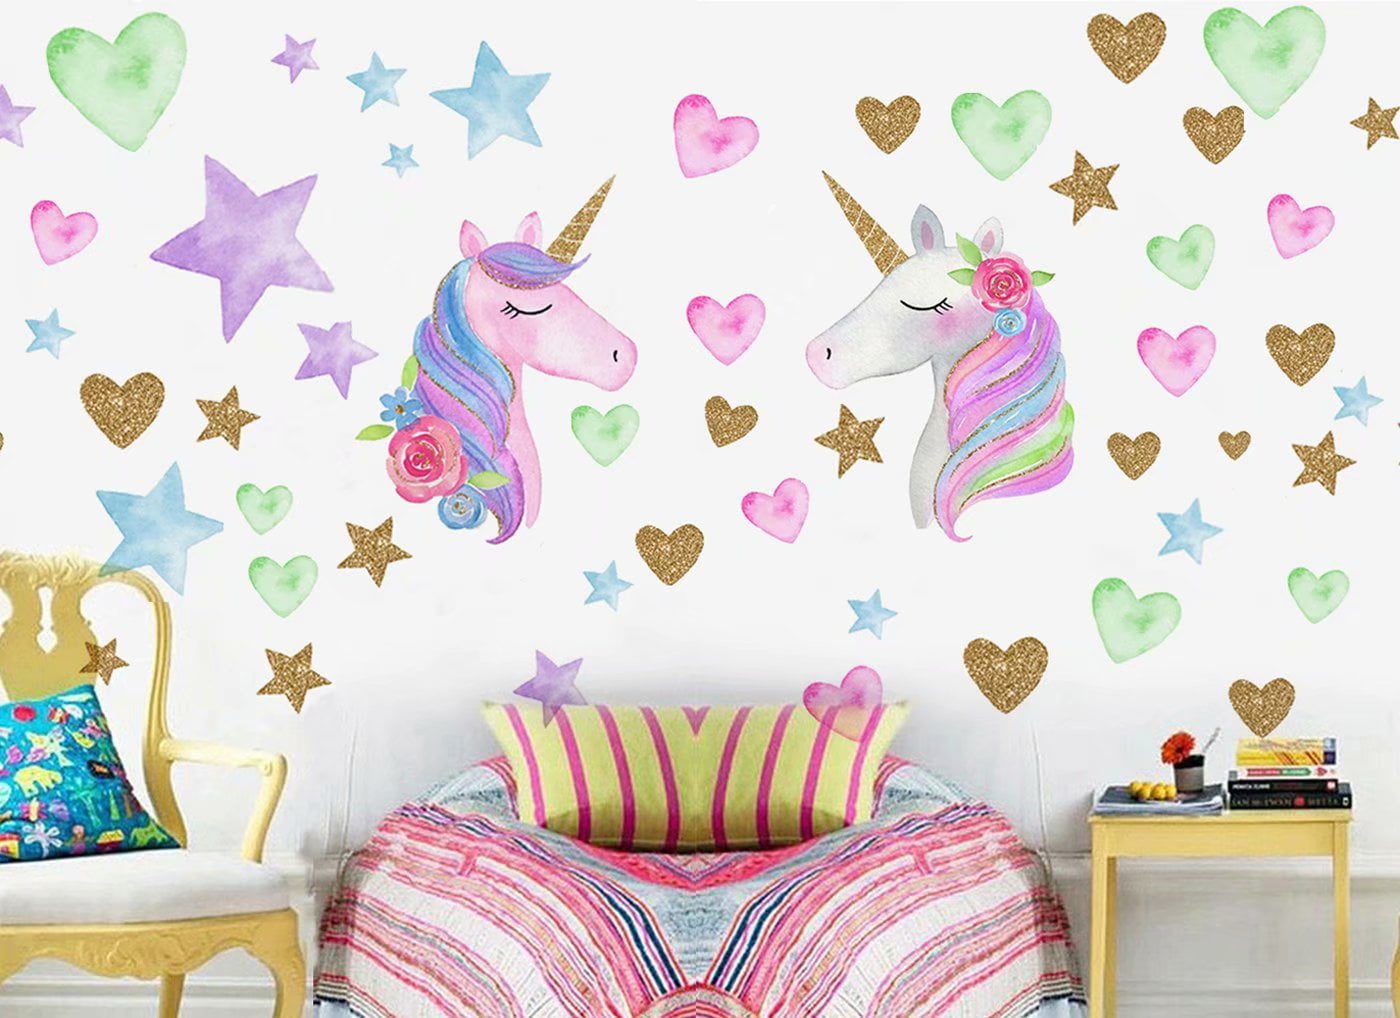 Unicorn Wall Stickers for Girls Bedroom Wall Decals Nursery Room Wall Decor Lovely Unicorn Gifts for Girls